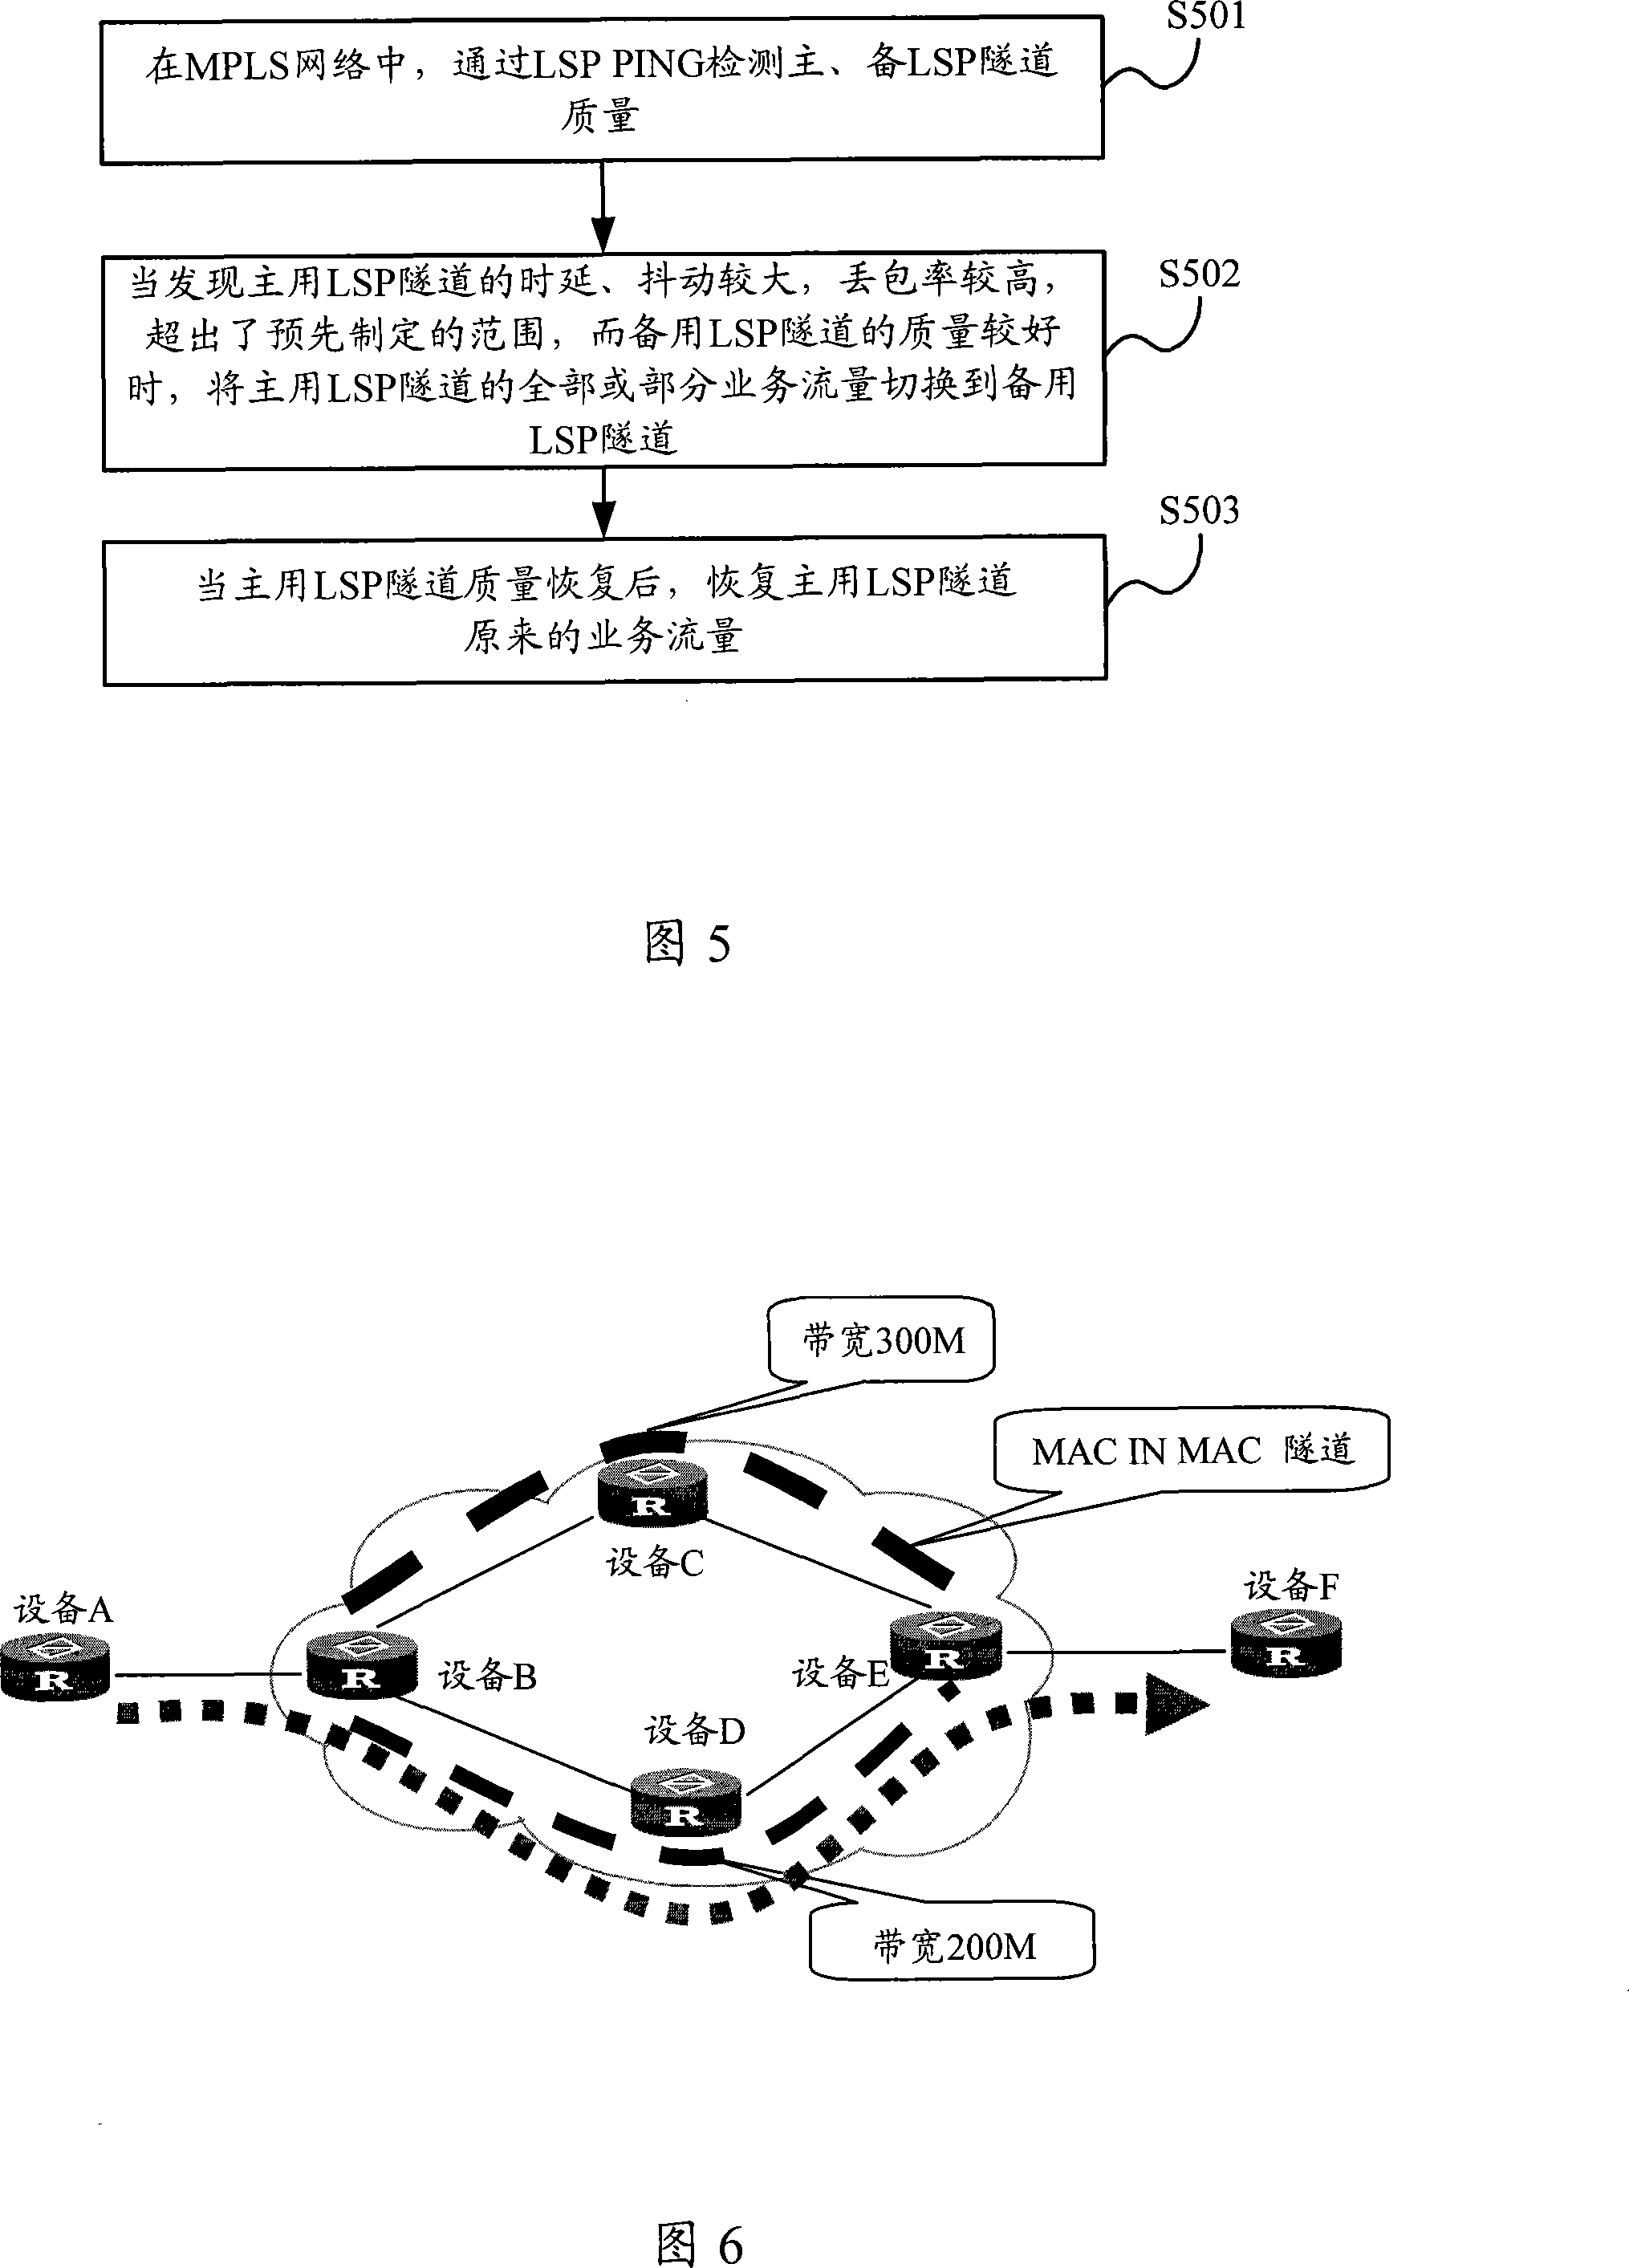 Service flow switching method and apparatus